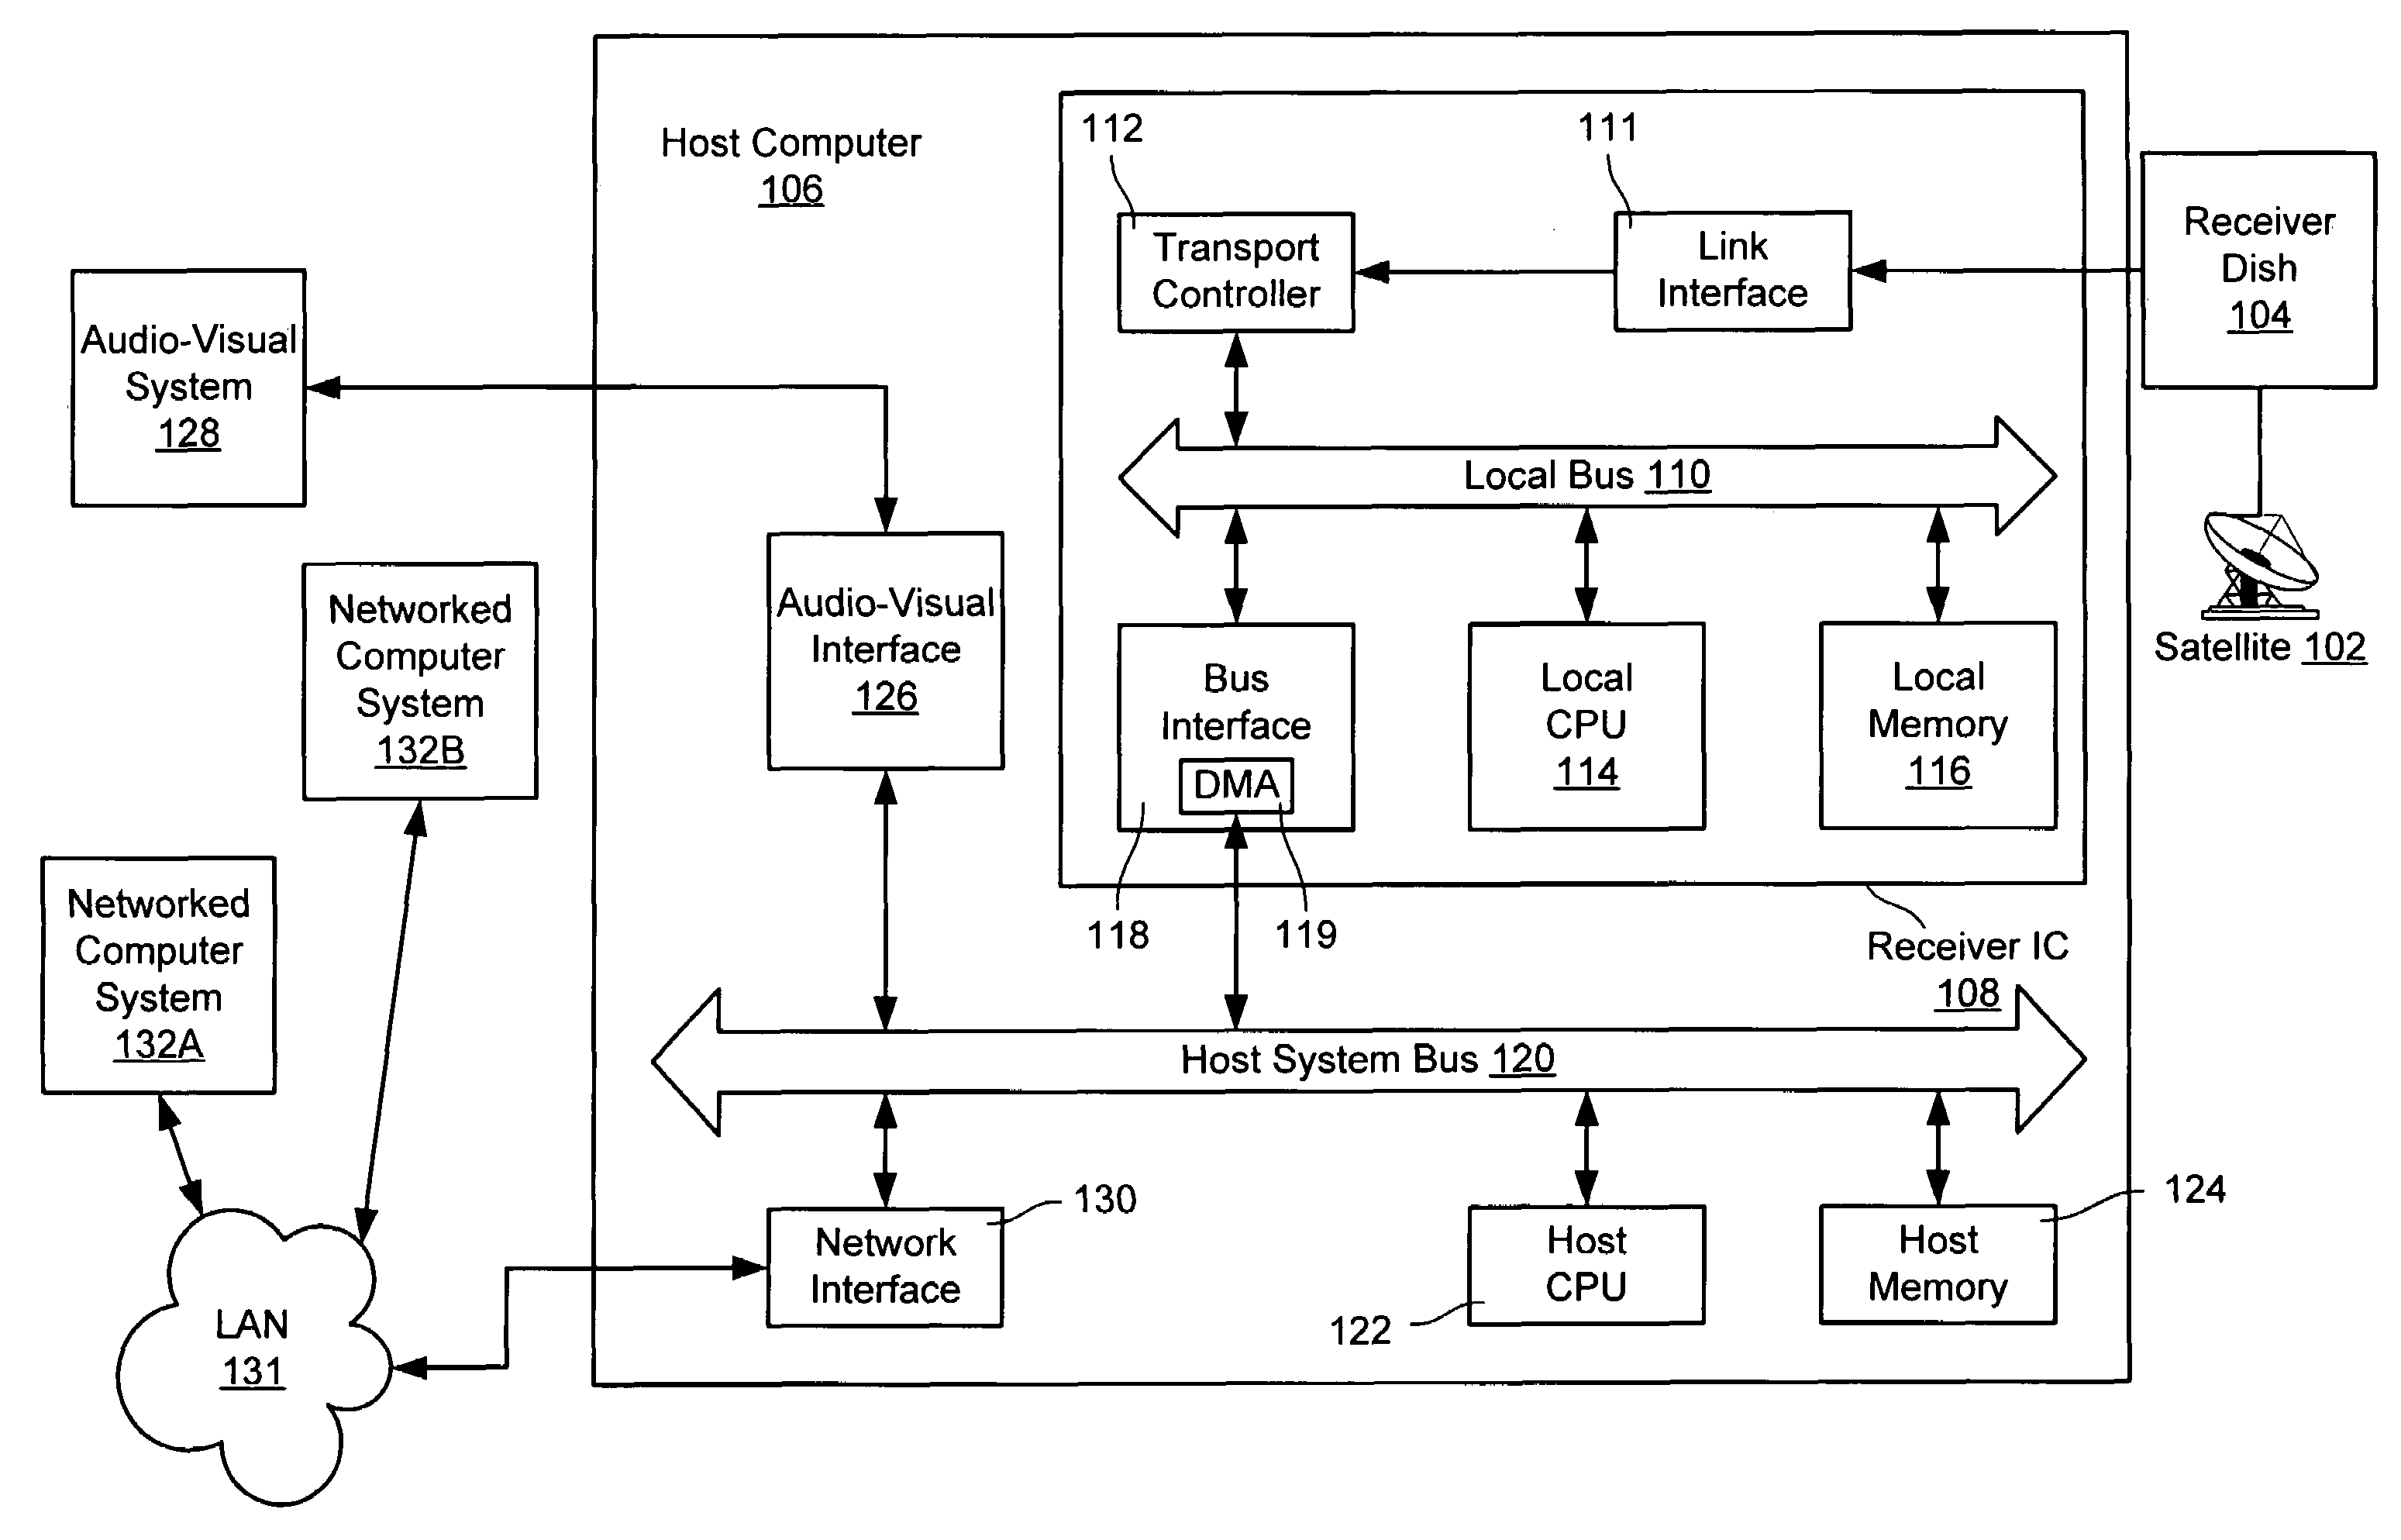 Multi-threaded direct memory access engine for broadcast data demultiplex operations